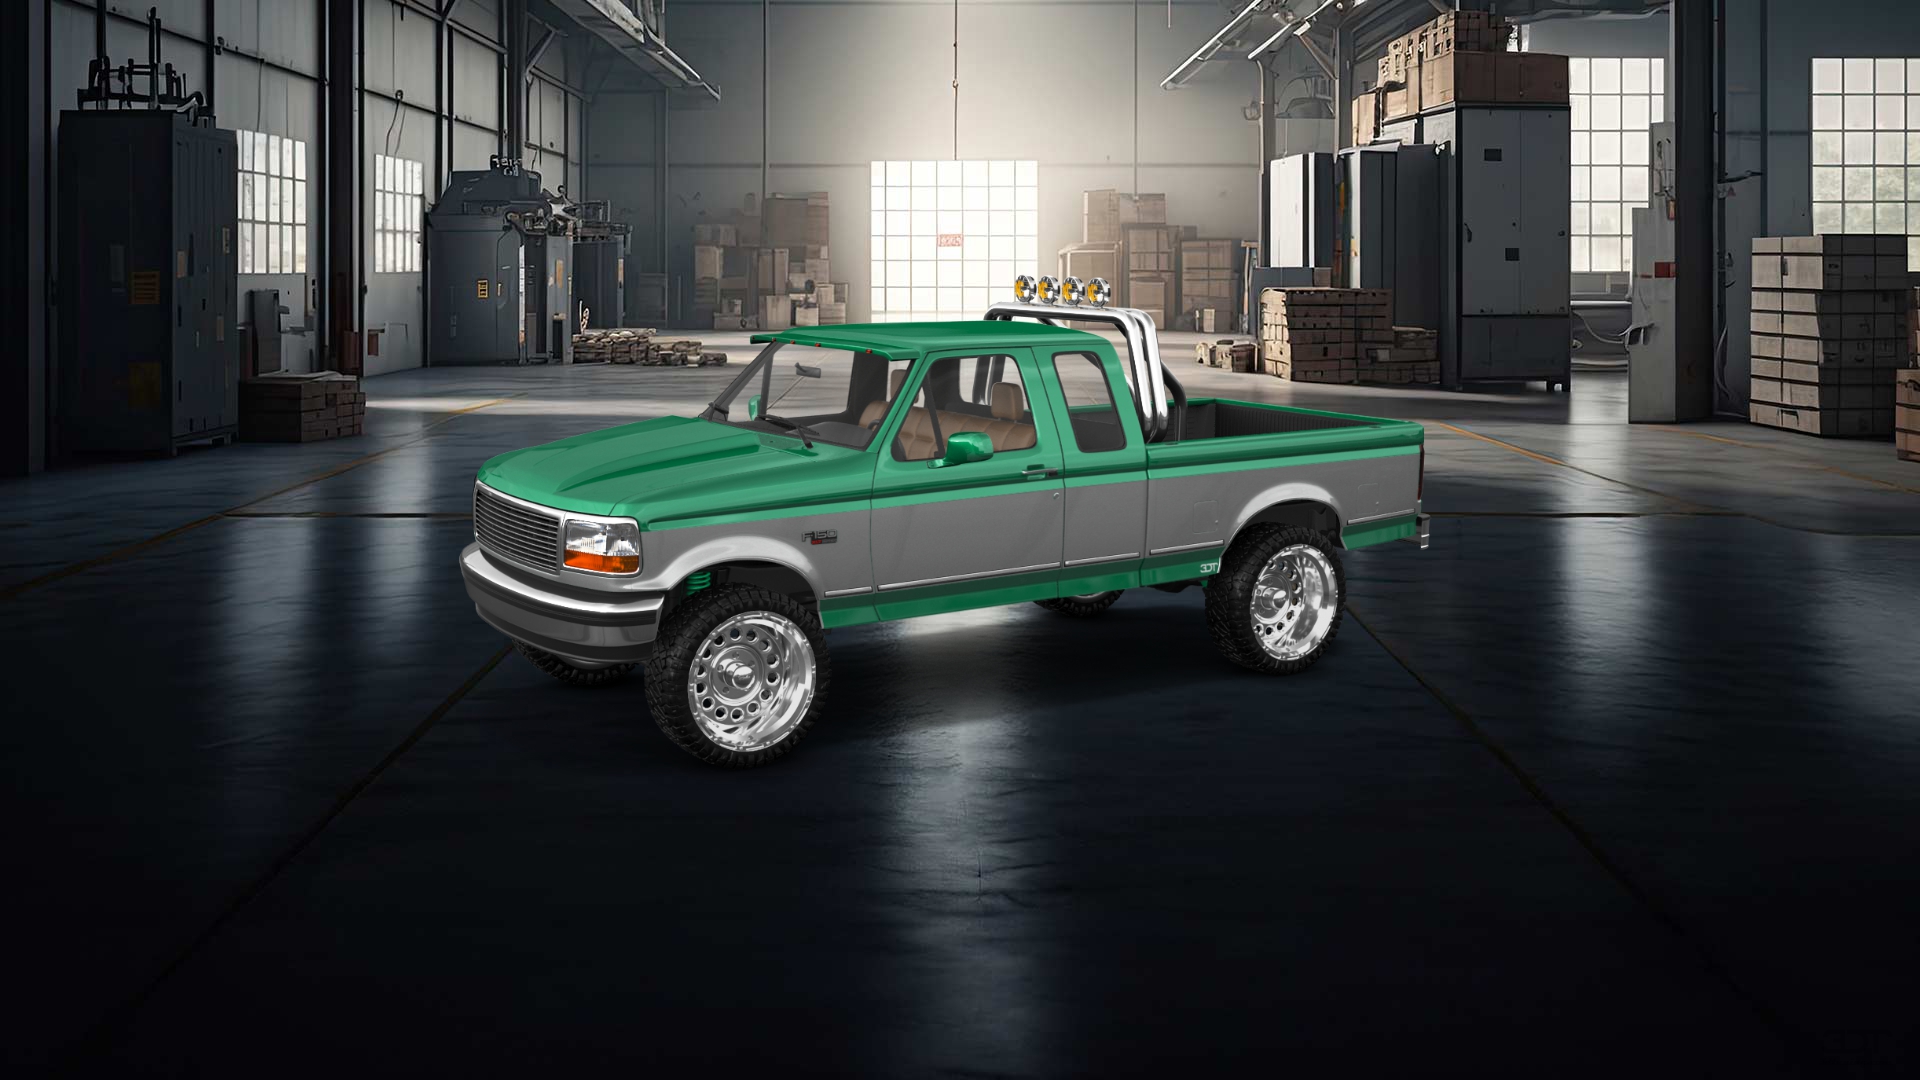 Ford F-150 SuperCab 2 Door pickup truck 1993 tuning